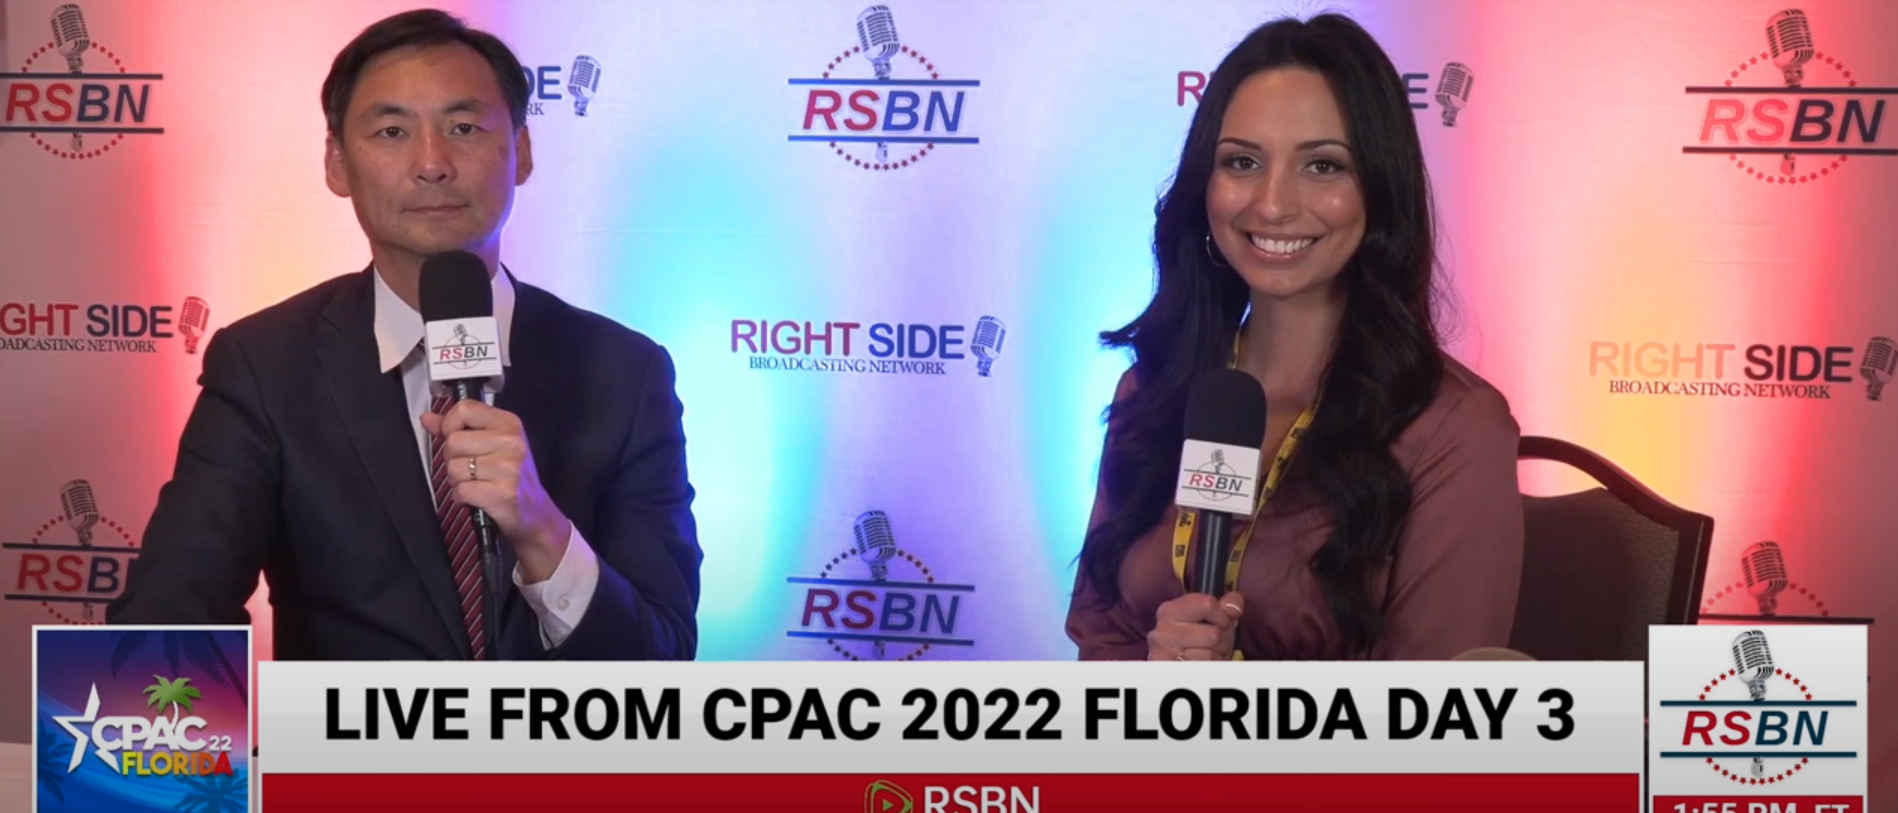 On Feb. 26, 2022, Grace Saldana of Right Side Broadcasting Network interviewed CPAC speaker, Morse Tan, who is the former Ambassador at Large for the U.S. State Department’s Office of Global Criminal Justice and is now the law dean of Liberty University. [YouTube/Screenshot/RightSideBroadcastingNetwork]